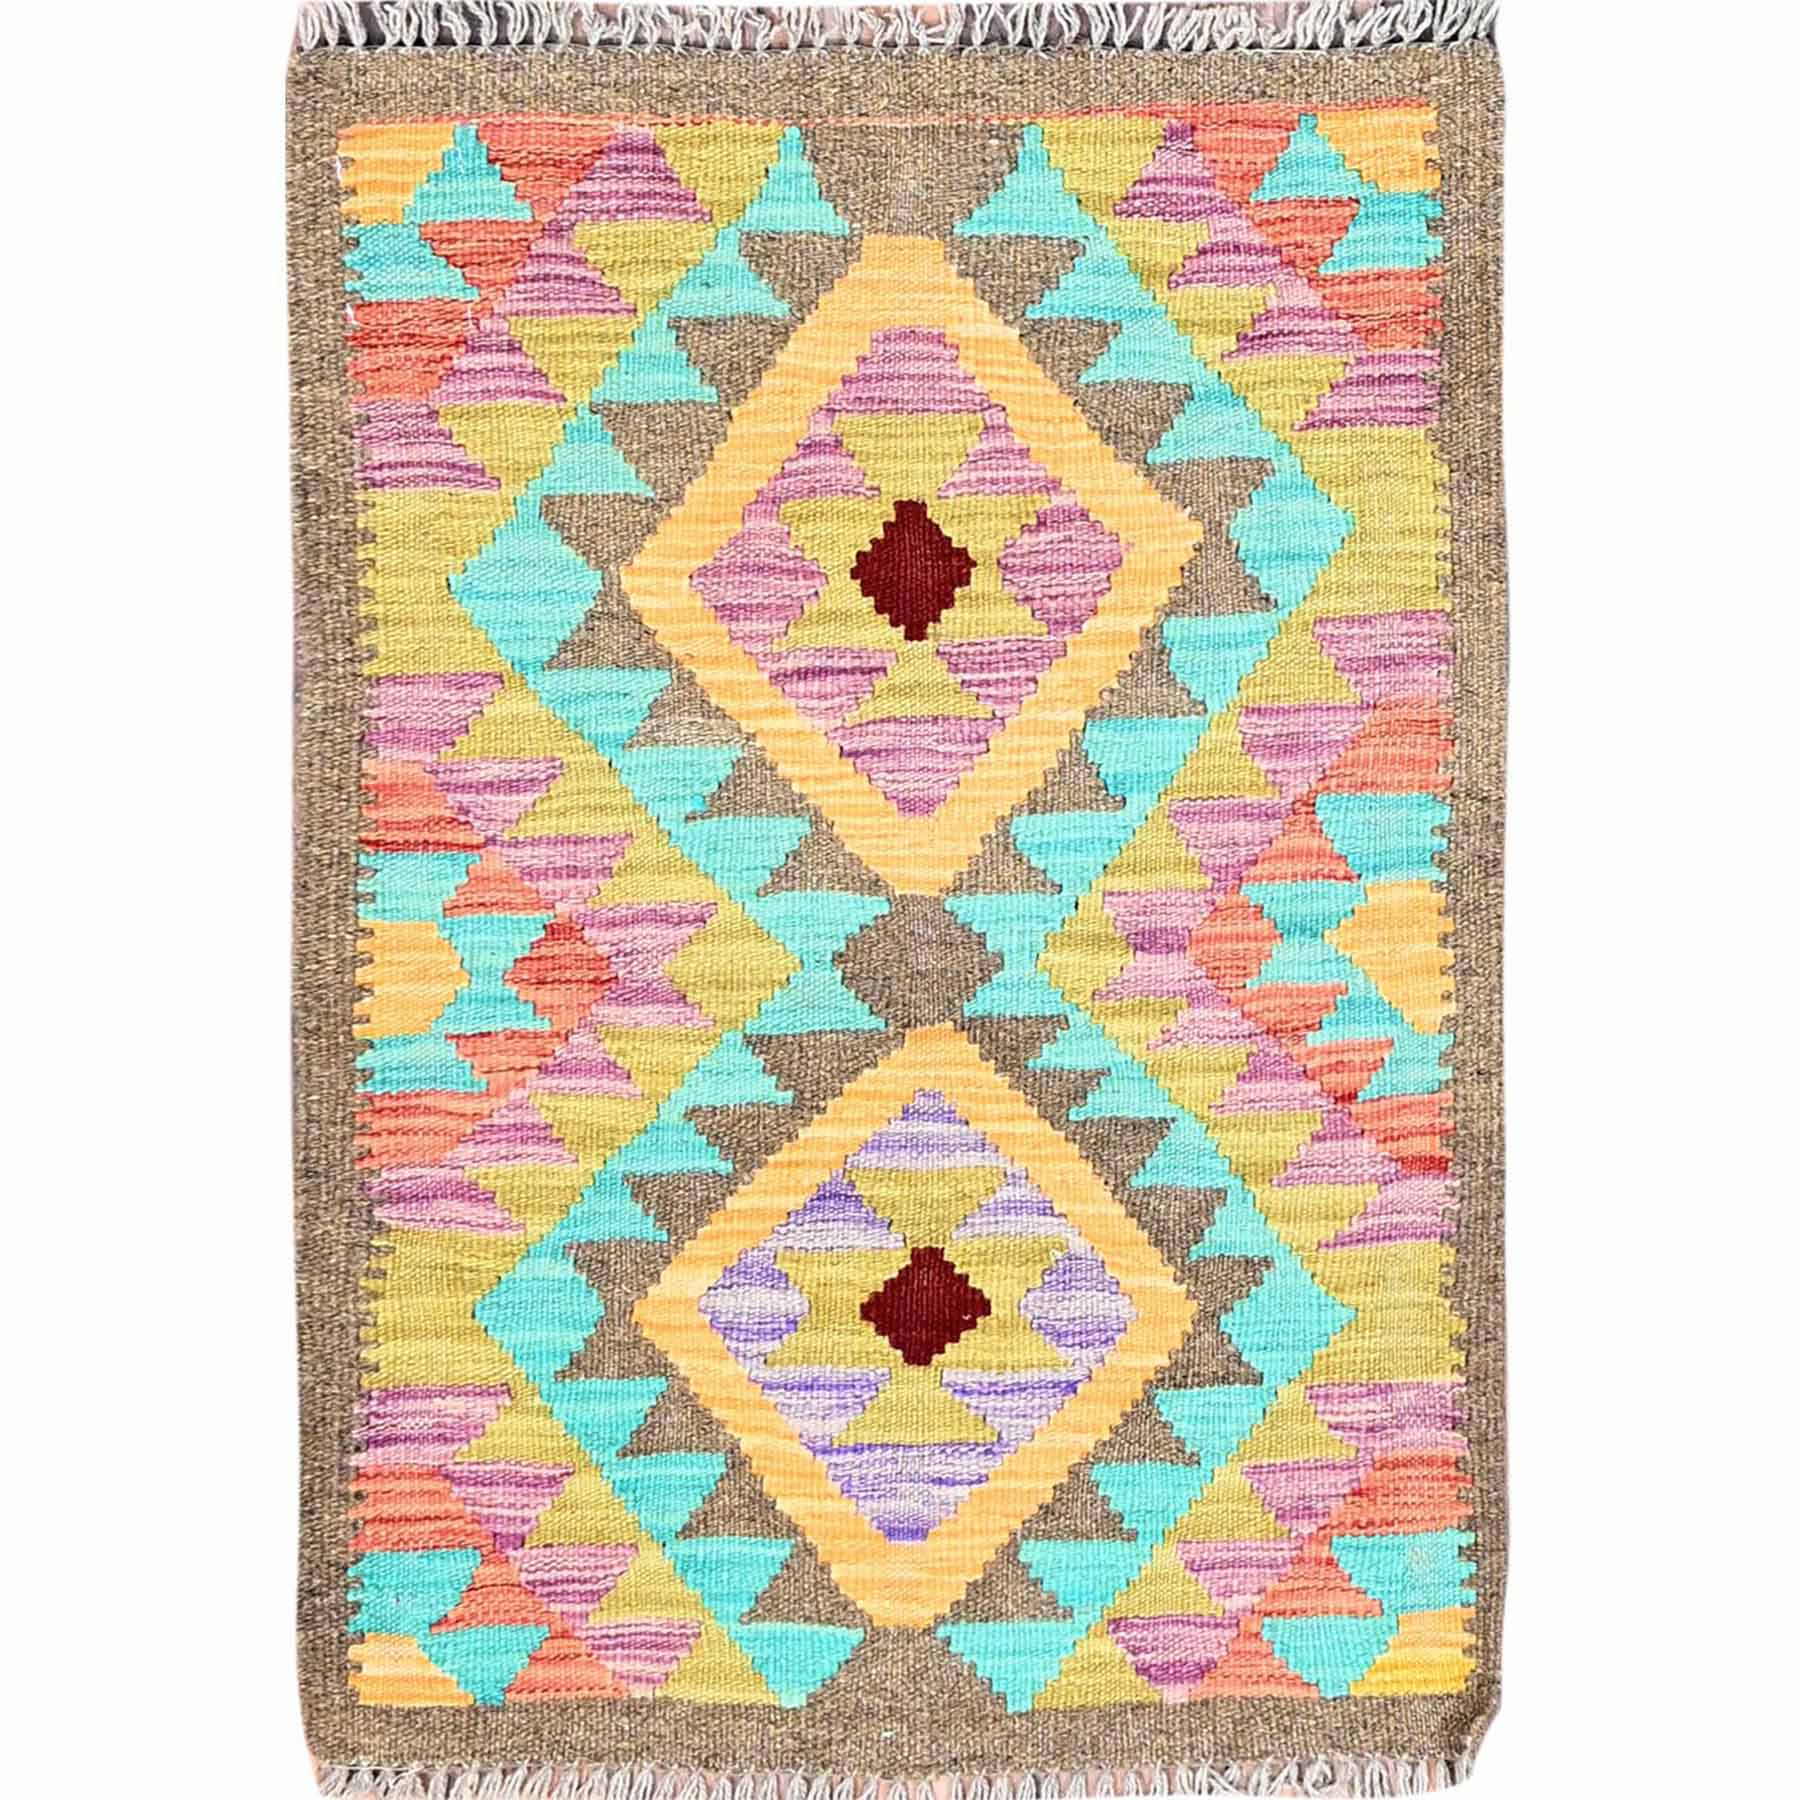 Colorful, Reversible, Flat Weave, Hand Woven, Pure Wool, Afghan Kilim With  Geometric Pattern, Natural Dyes, Oriental Rug- Product:Colorful-Reversible- Flat-Weave-Hand-Woven-Pure-Wool-Afghan-Kilim-With-Geometric -Pattern-Natural-Dyes-Oriental-Rug-428665